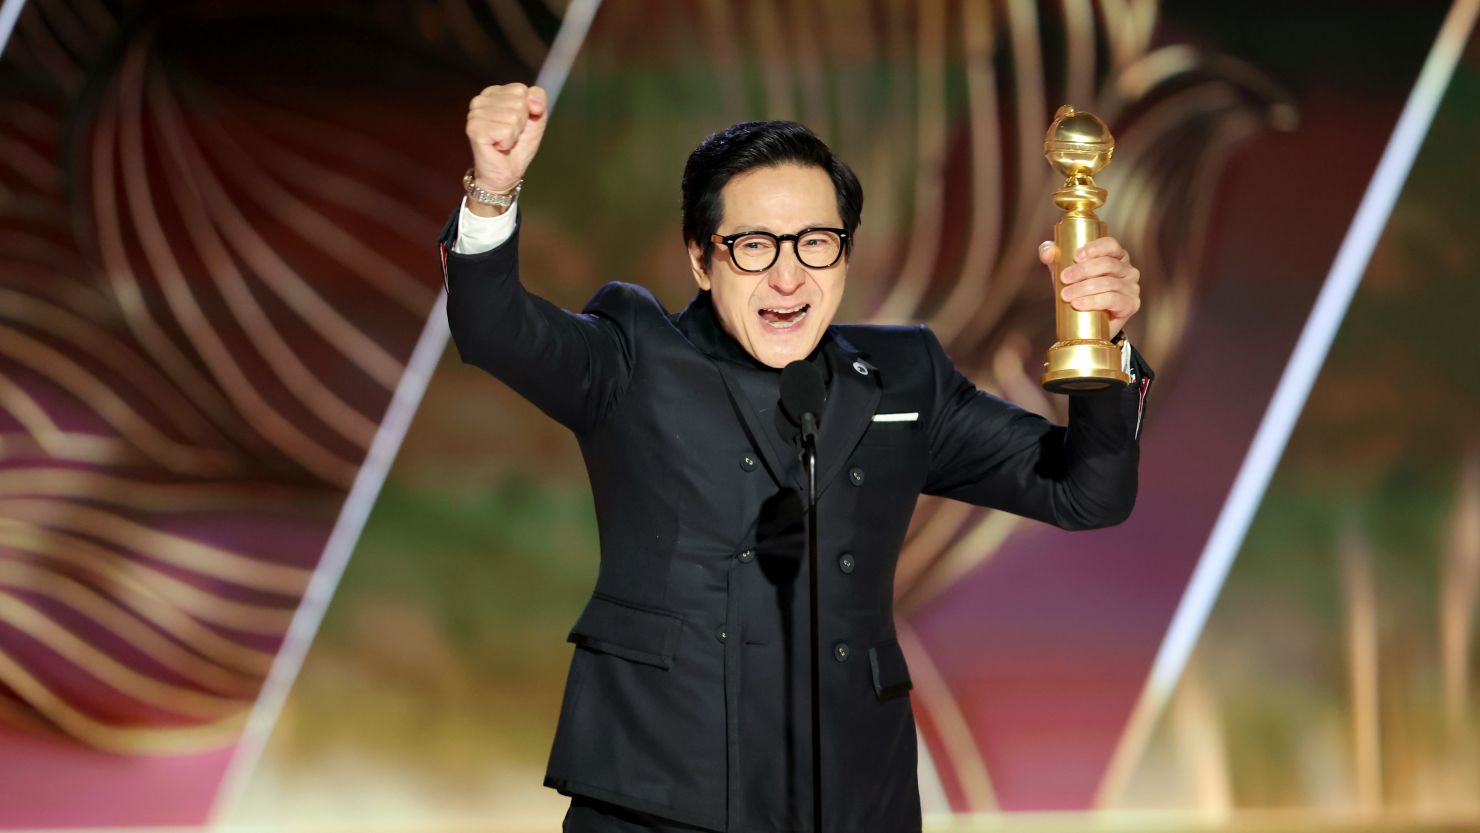 Ke Huy Quan thanks Spielberg for first role in moving Golden Globes